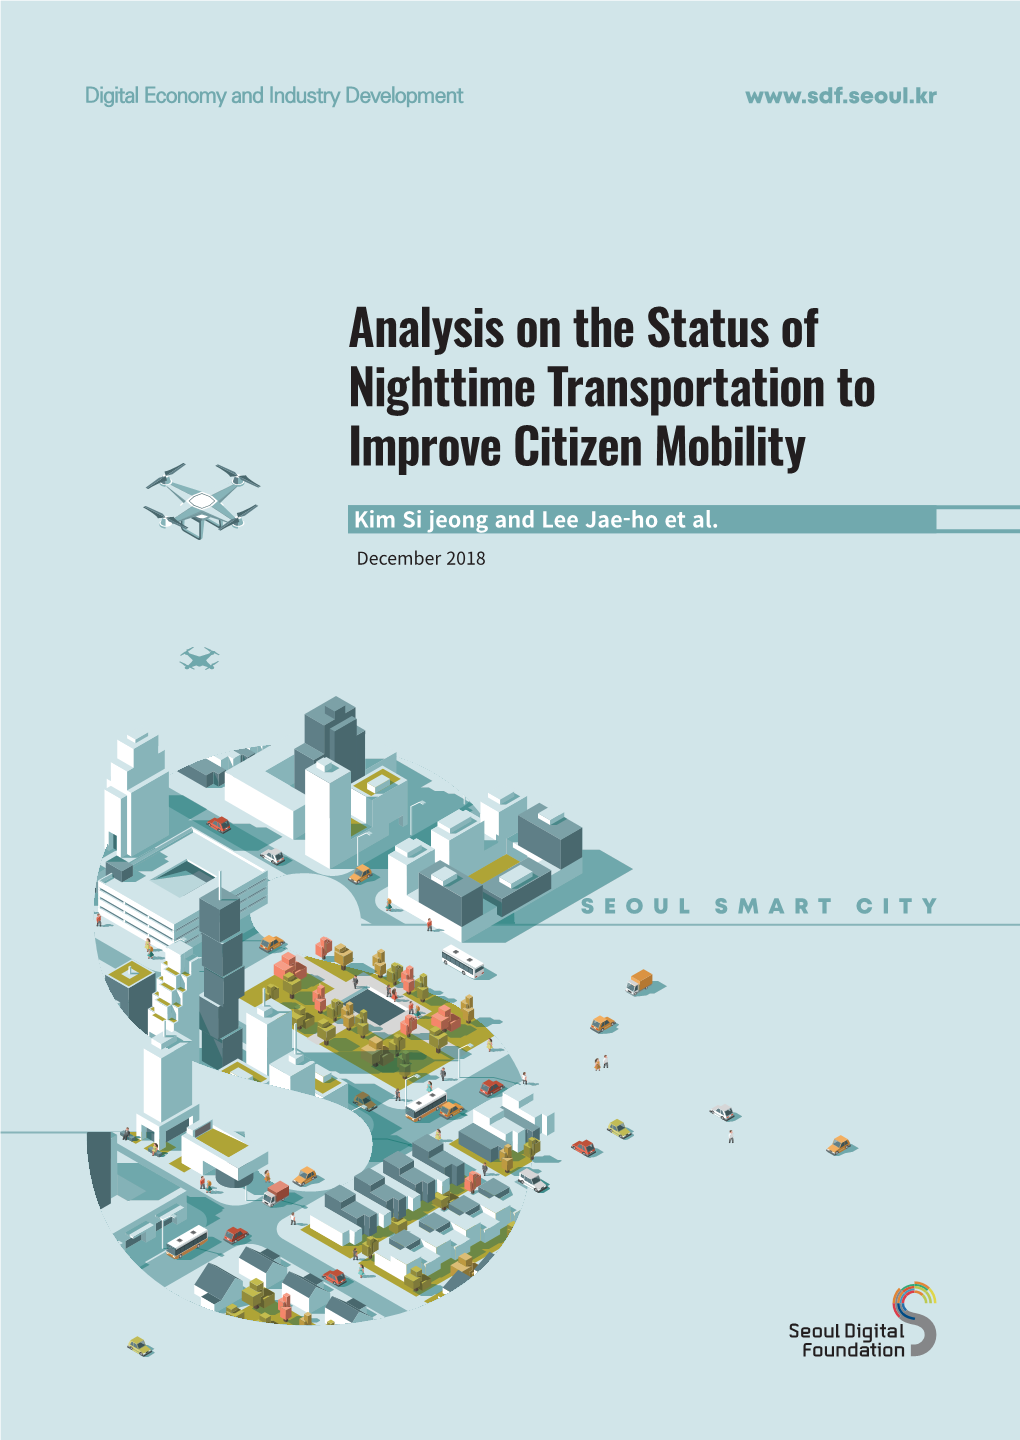 Analysis on the Status of Nighttime Transportation to Improve Citizen Mobility